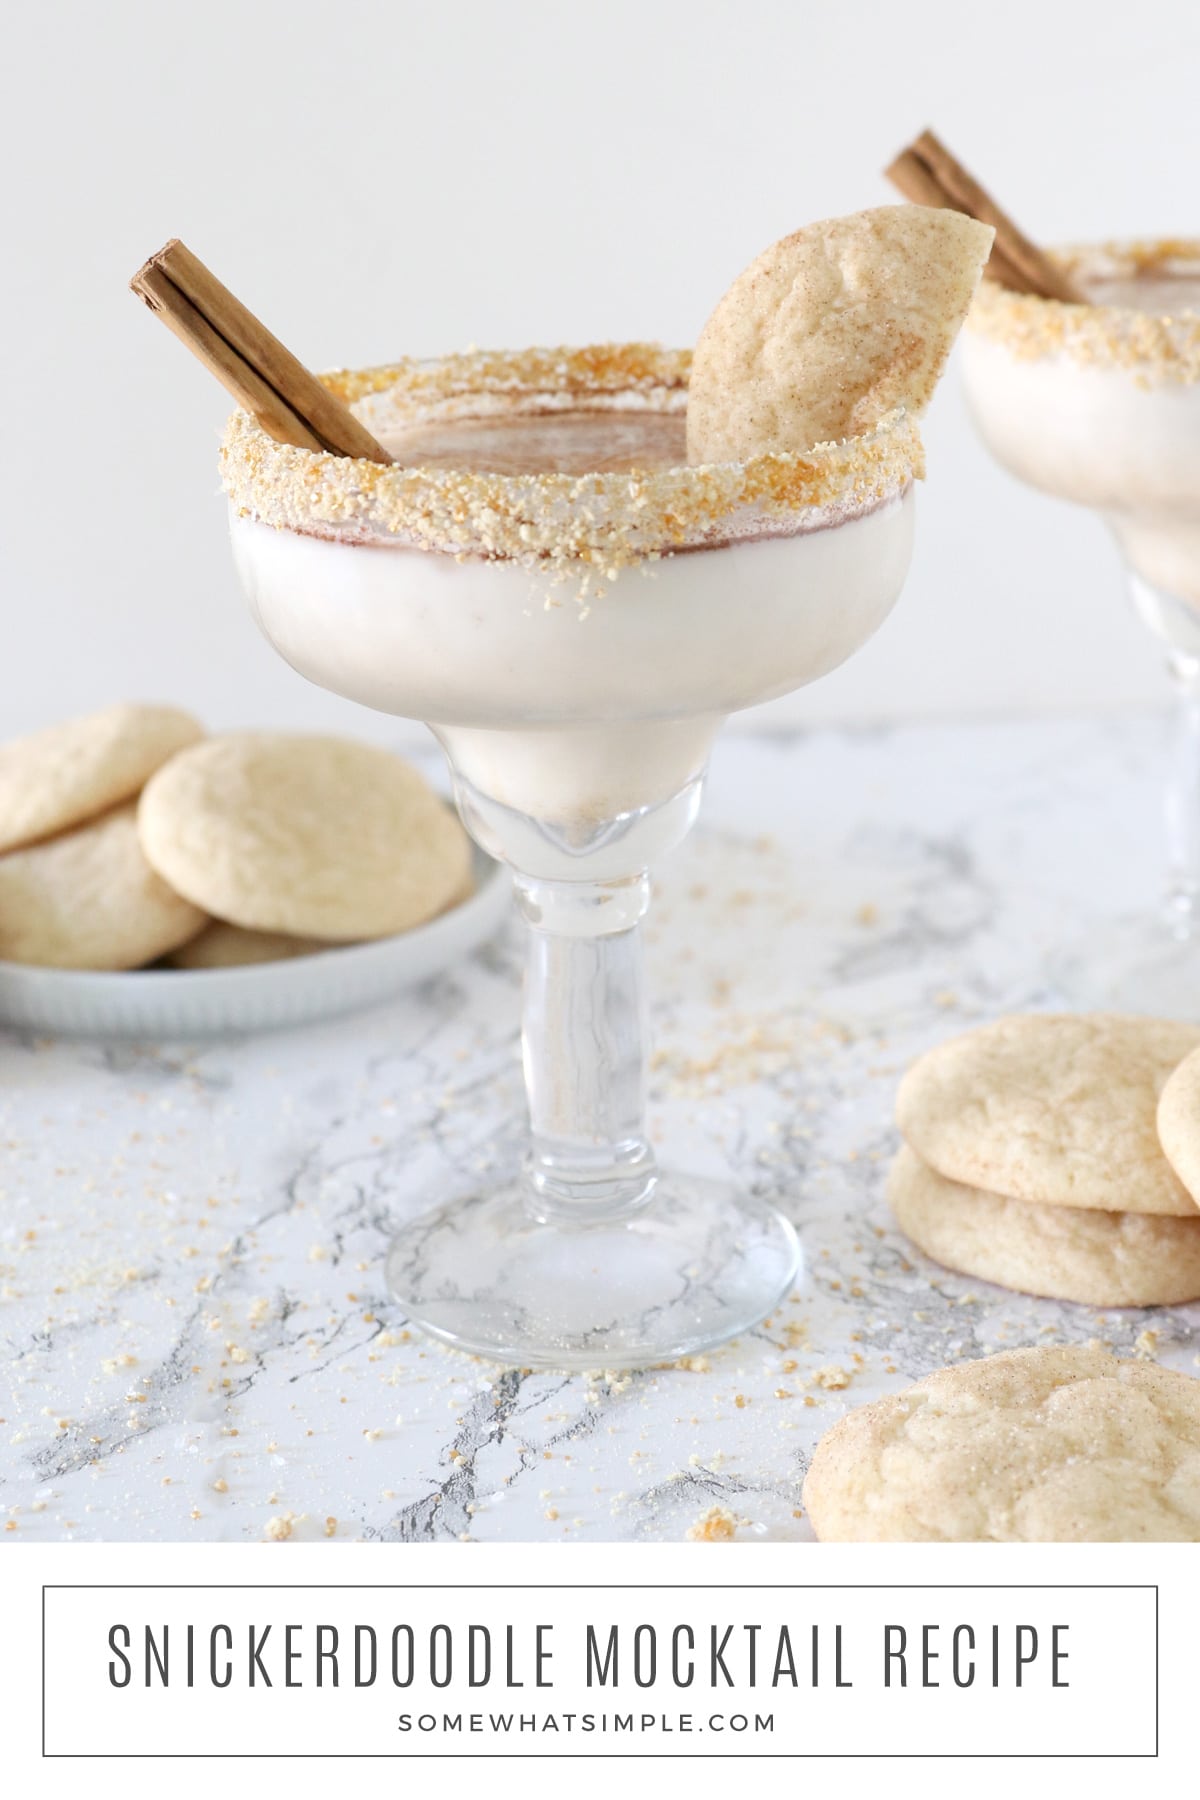 Turn your favorite cookie recipe into a creamy, delicious drink! Easy-to-make Snickerdoodle Mocktails are perfect for sipping this holiday season! via @somewhatsimple